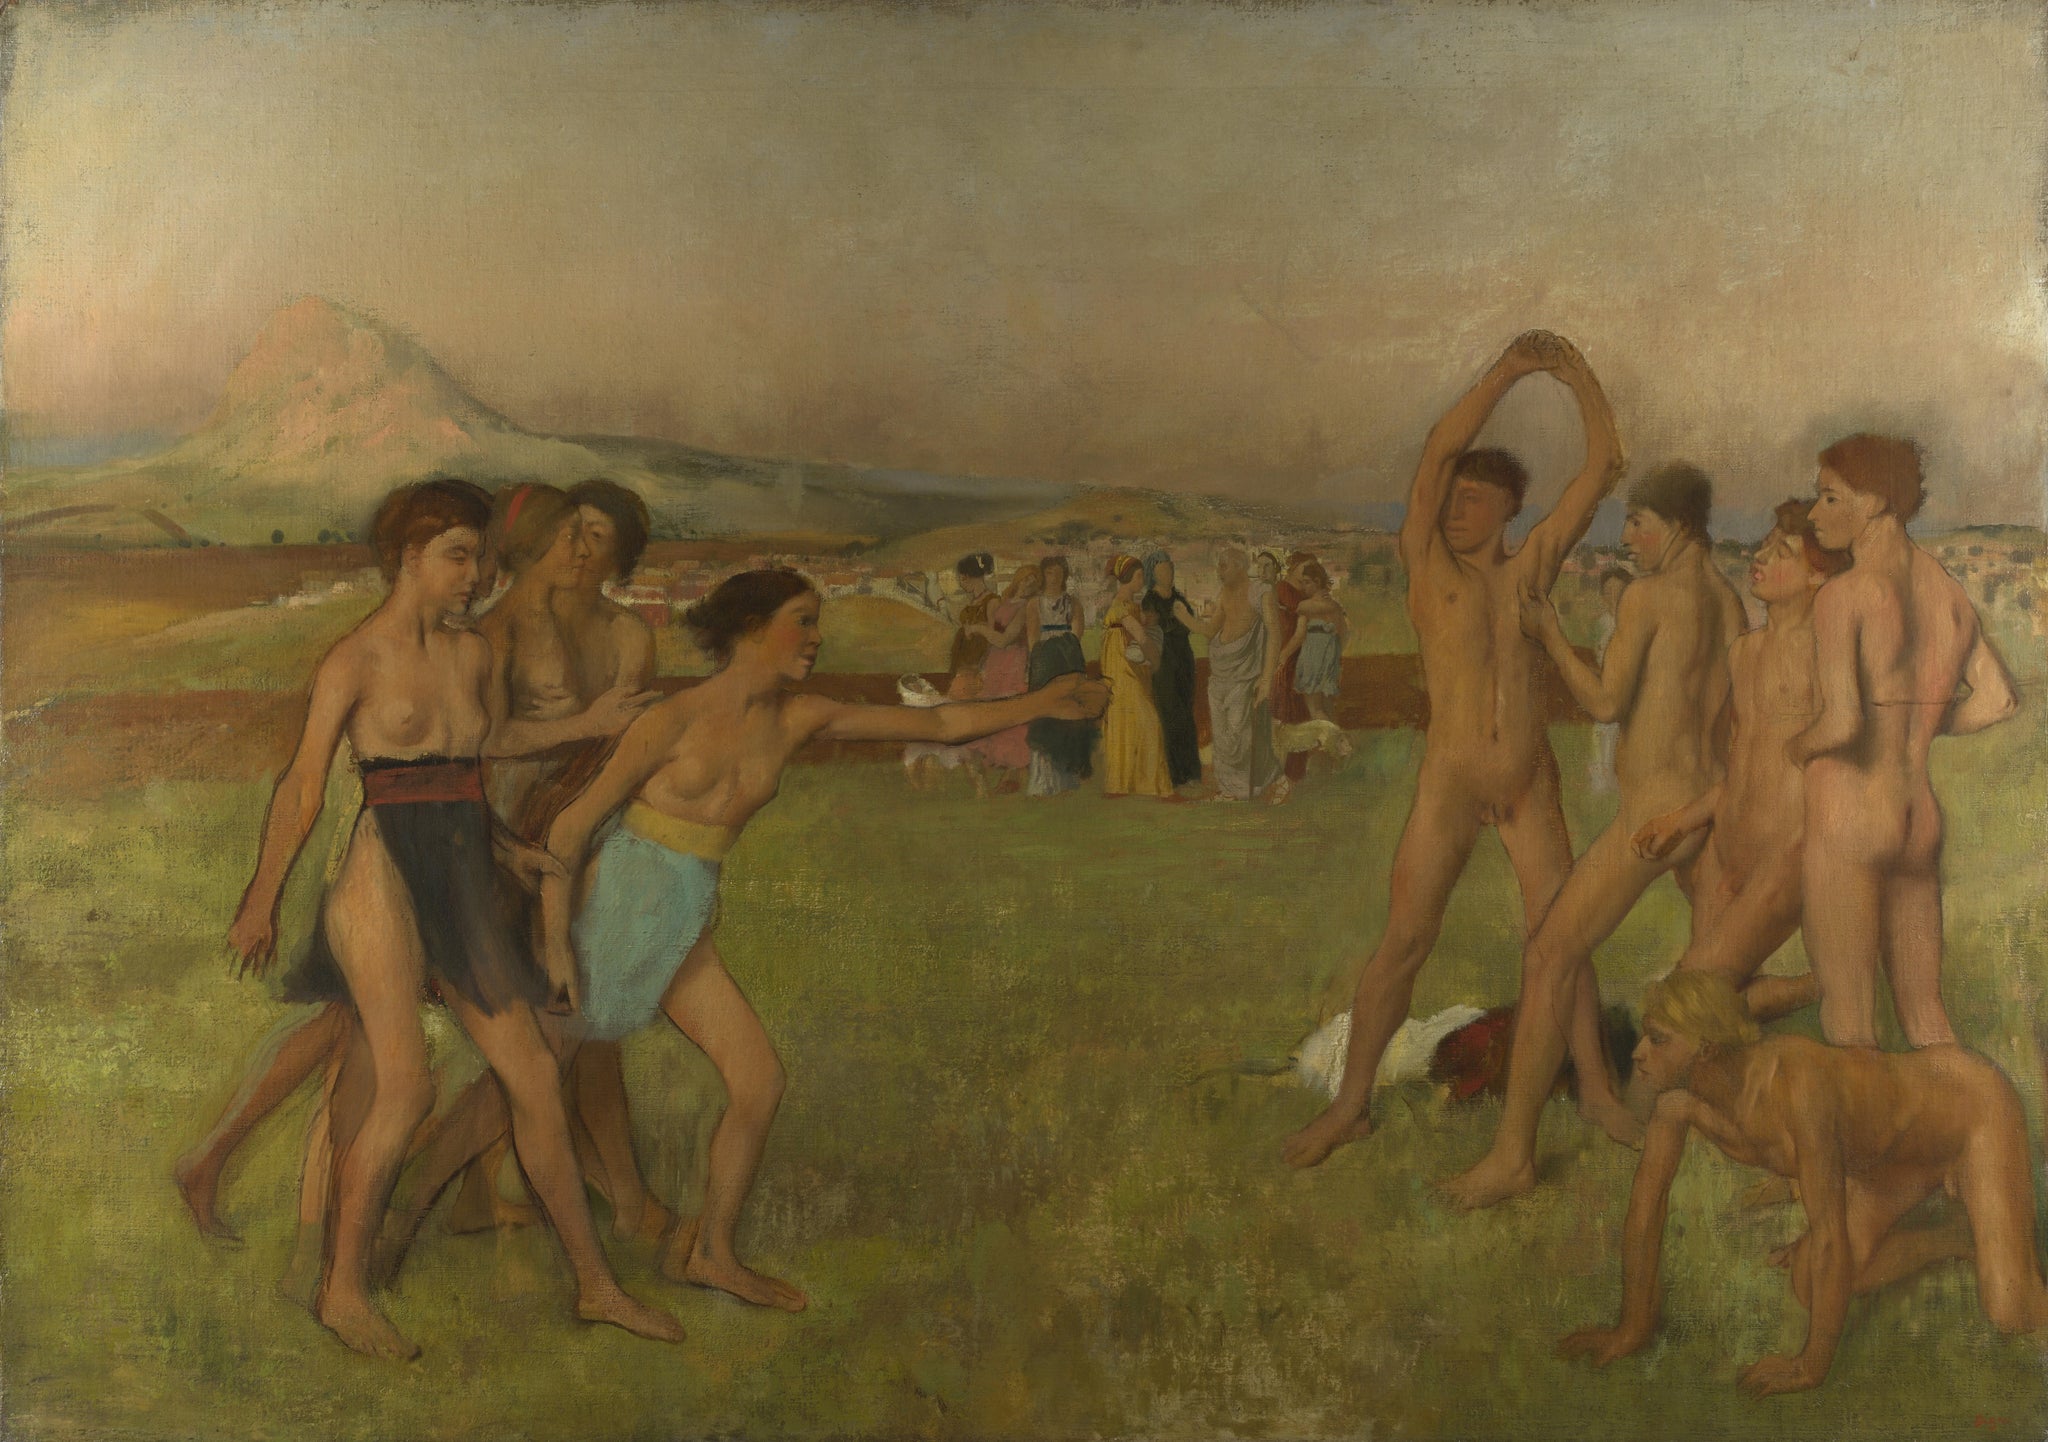 Young Spartans Exercising Nude (1860) by Edgar Degas - 17" x 22" Fine Art Print